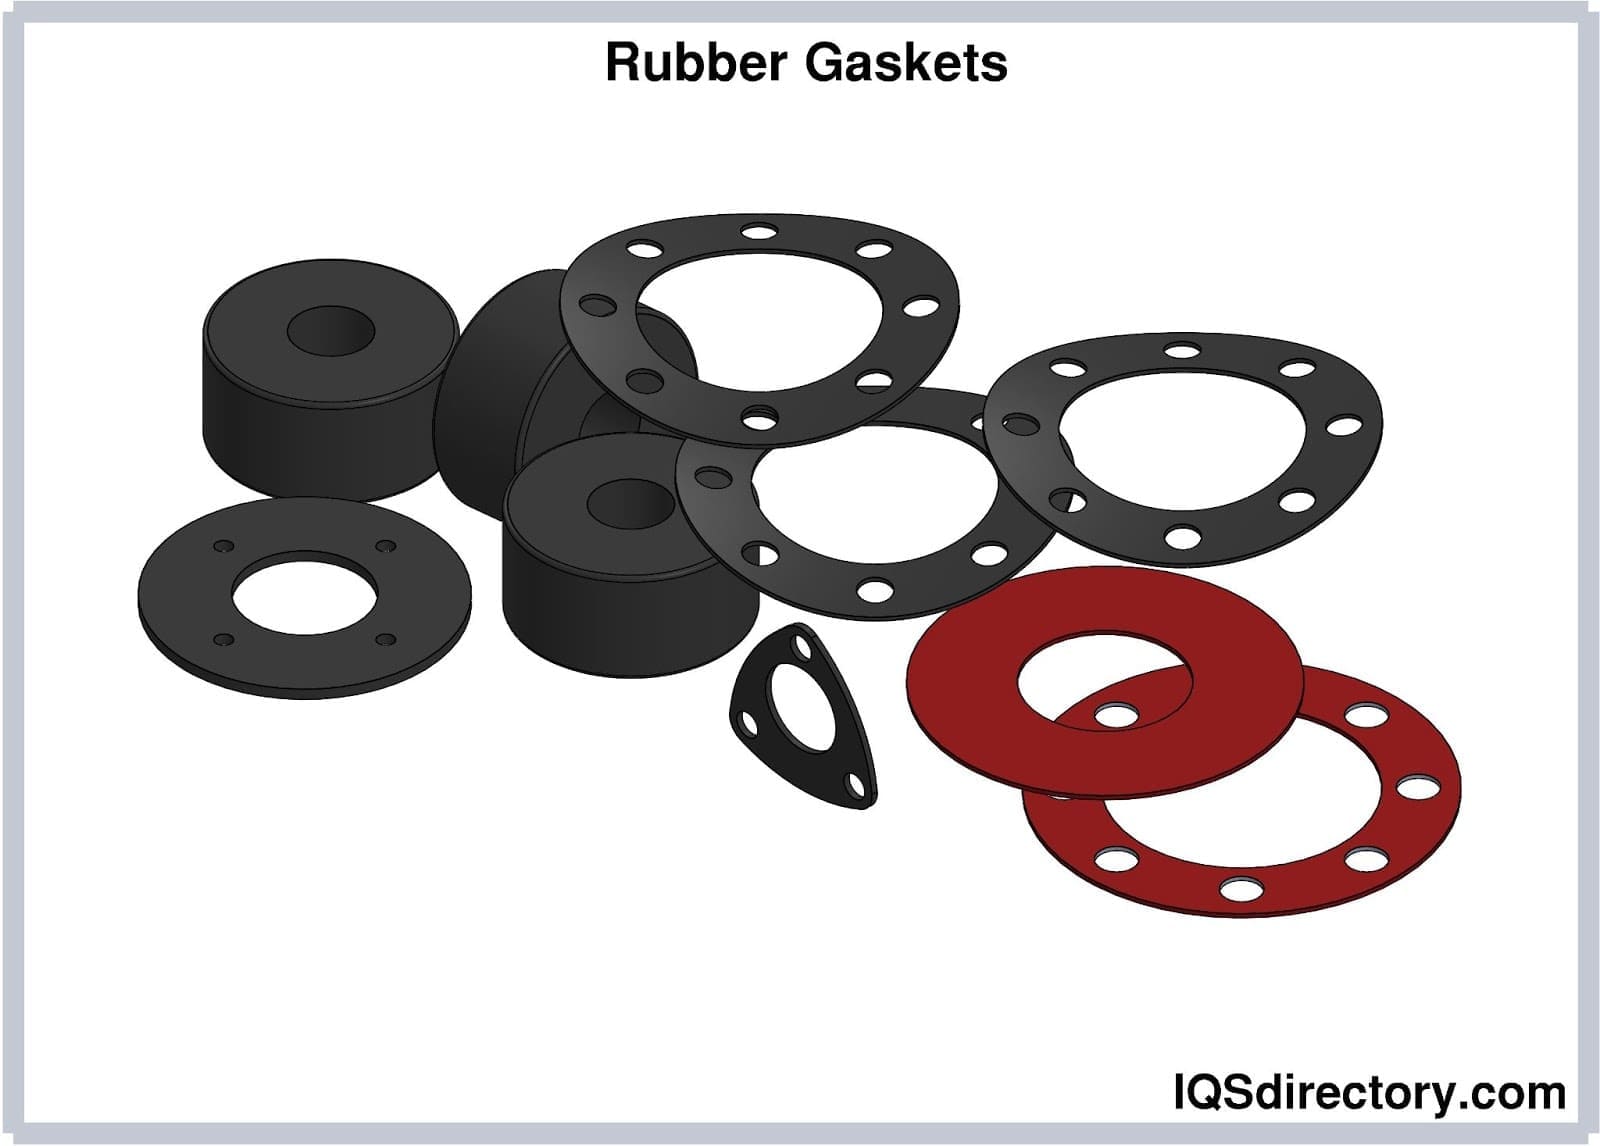 Rubber Gasket: What Is It? How Is it Used? Types of